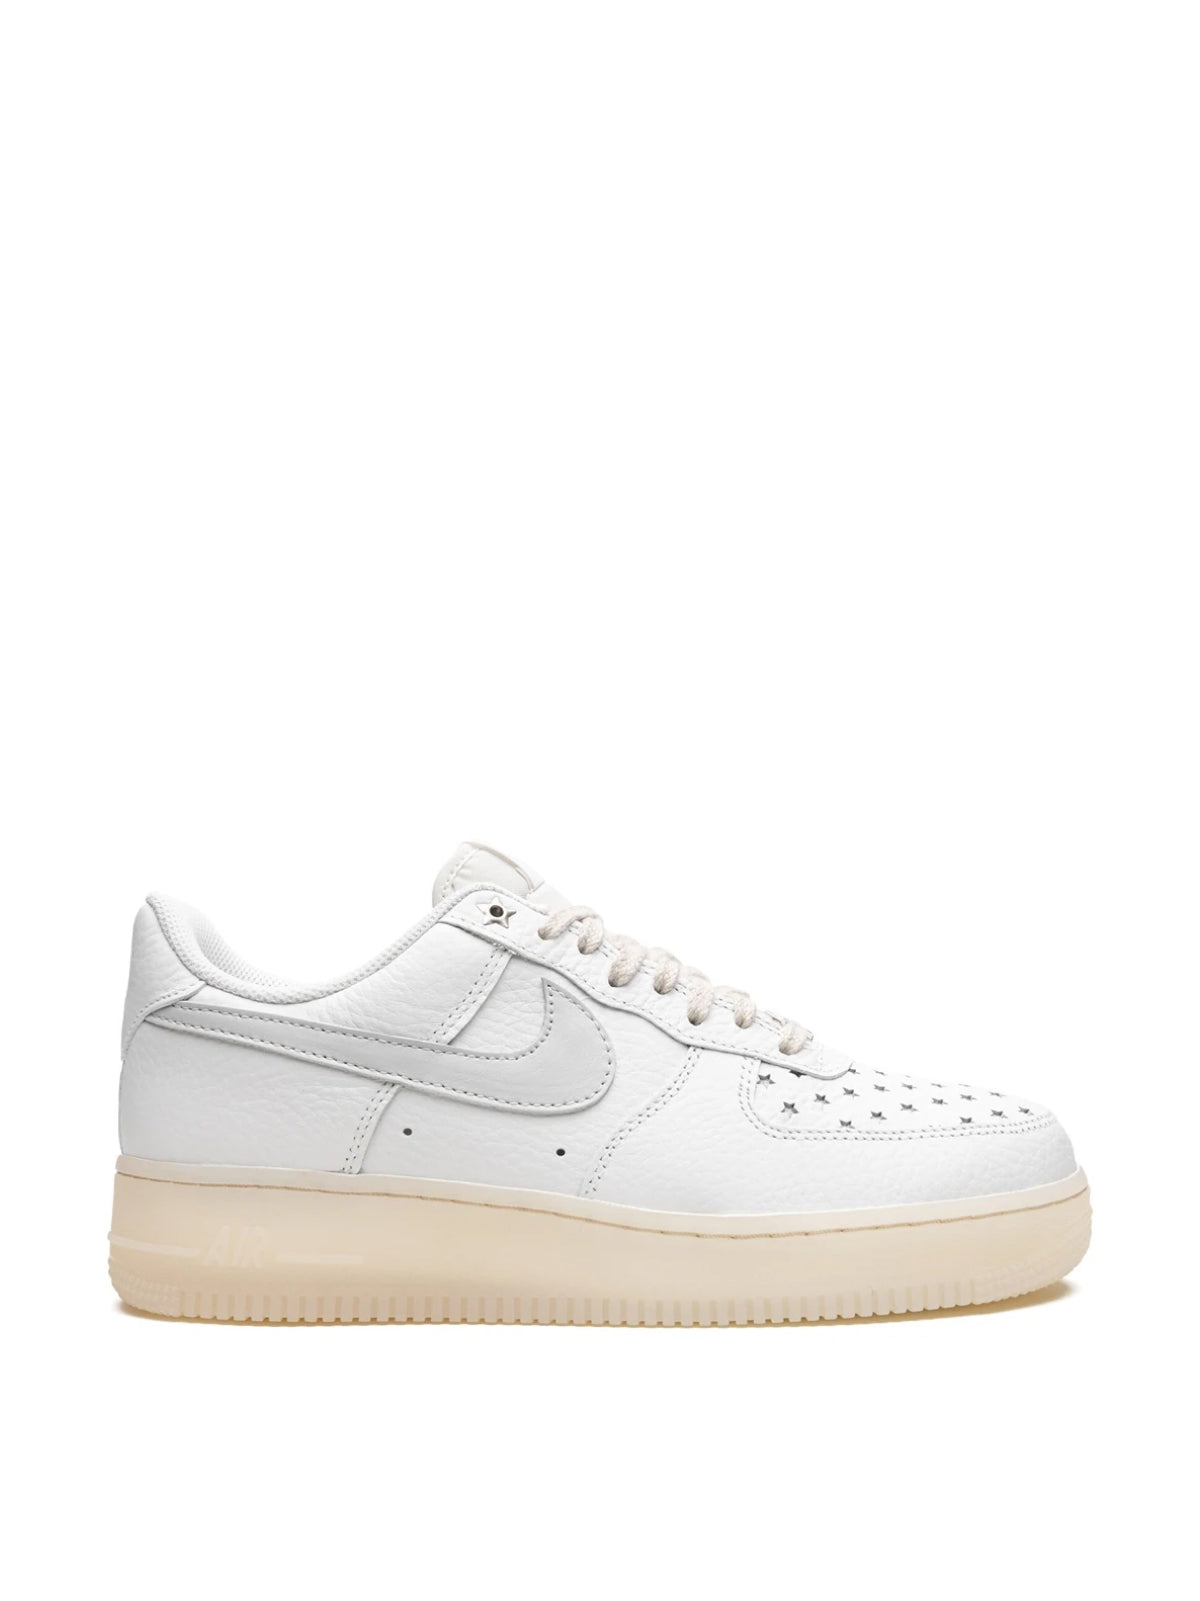 Nike-OUTLET-SALE-Air Force 1 '07 Sneakers-ARCHIVIST